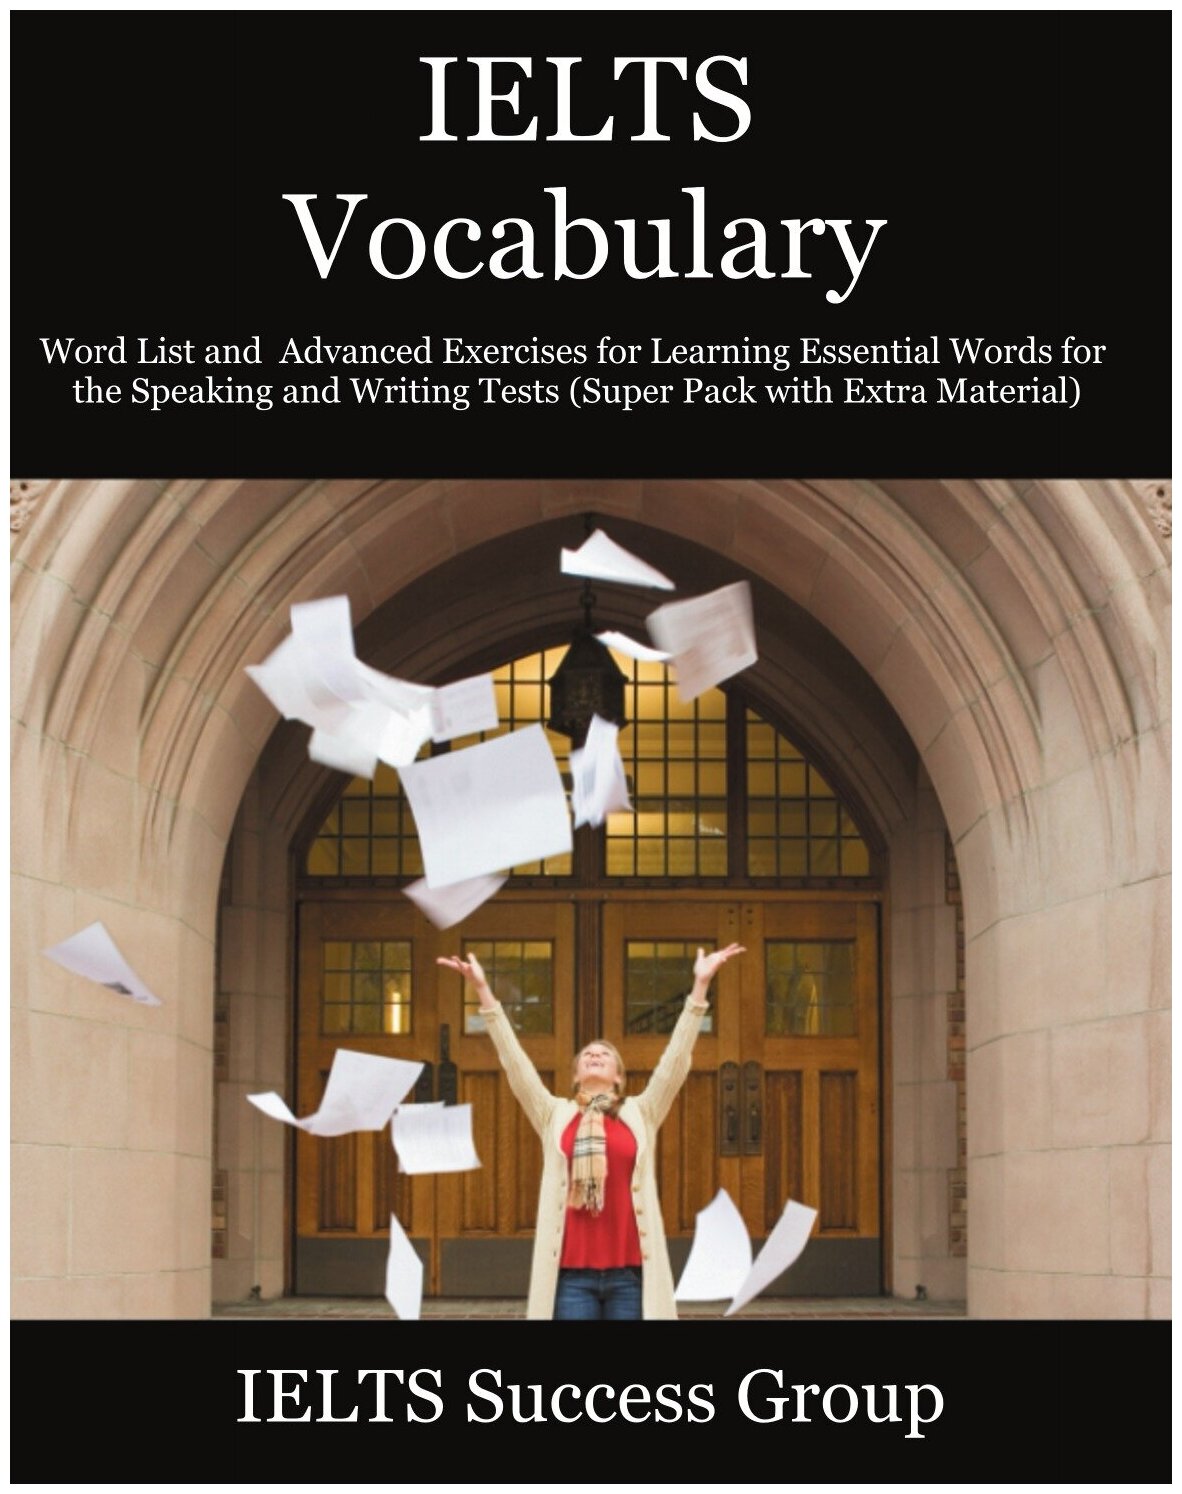 IELTS Vocabulary. Word List and Advanced Exercises for Learning Essential Words for the Speaking and Writing Tests (Super Pack with Extra Material)